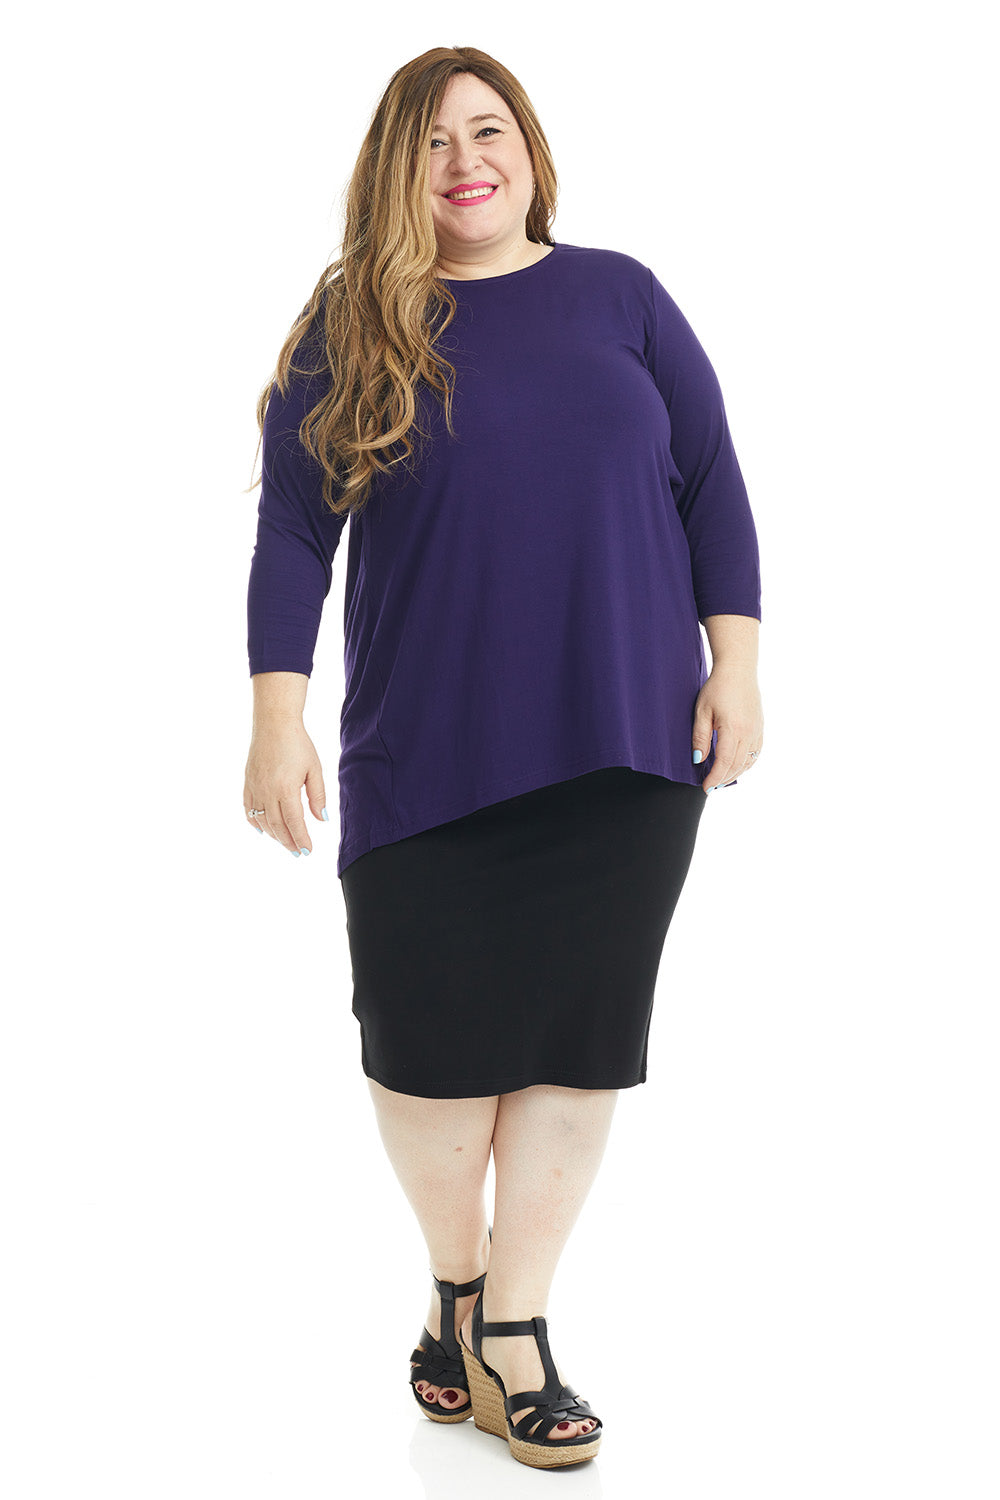 purple high-low plus size loose tunic top for women good for maternity